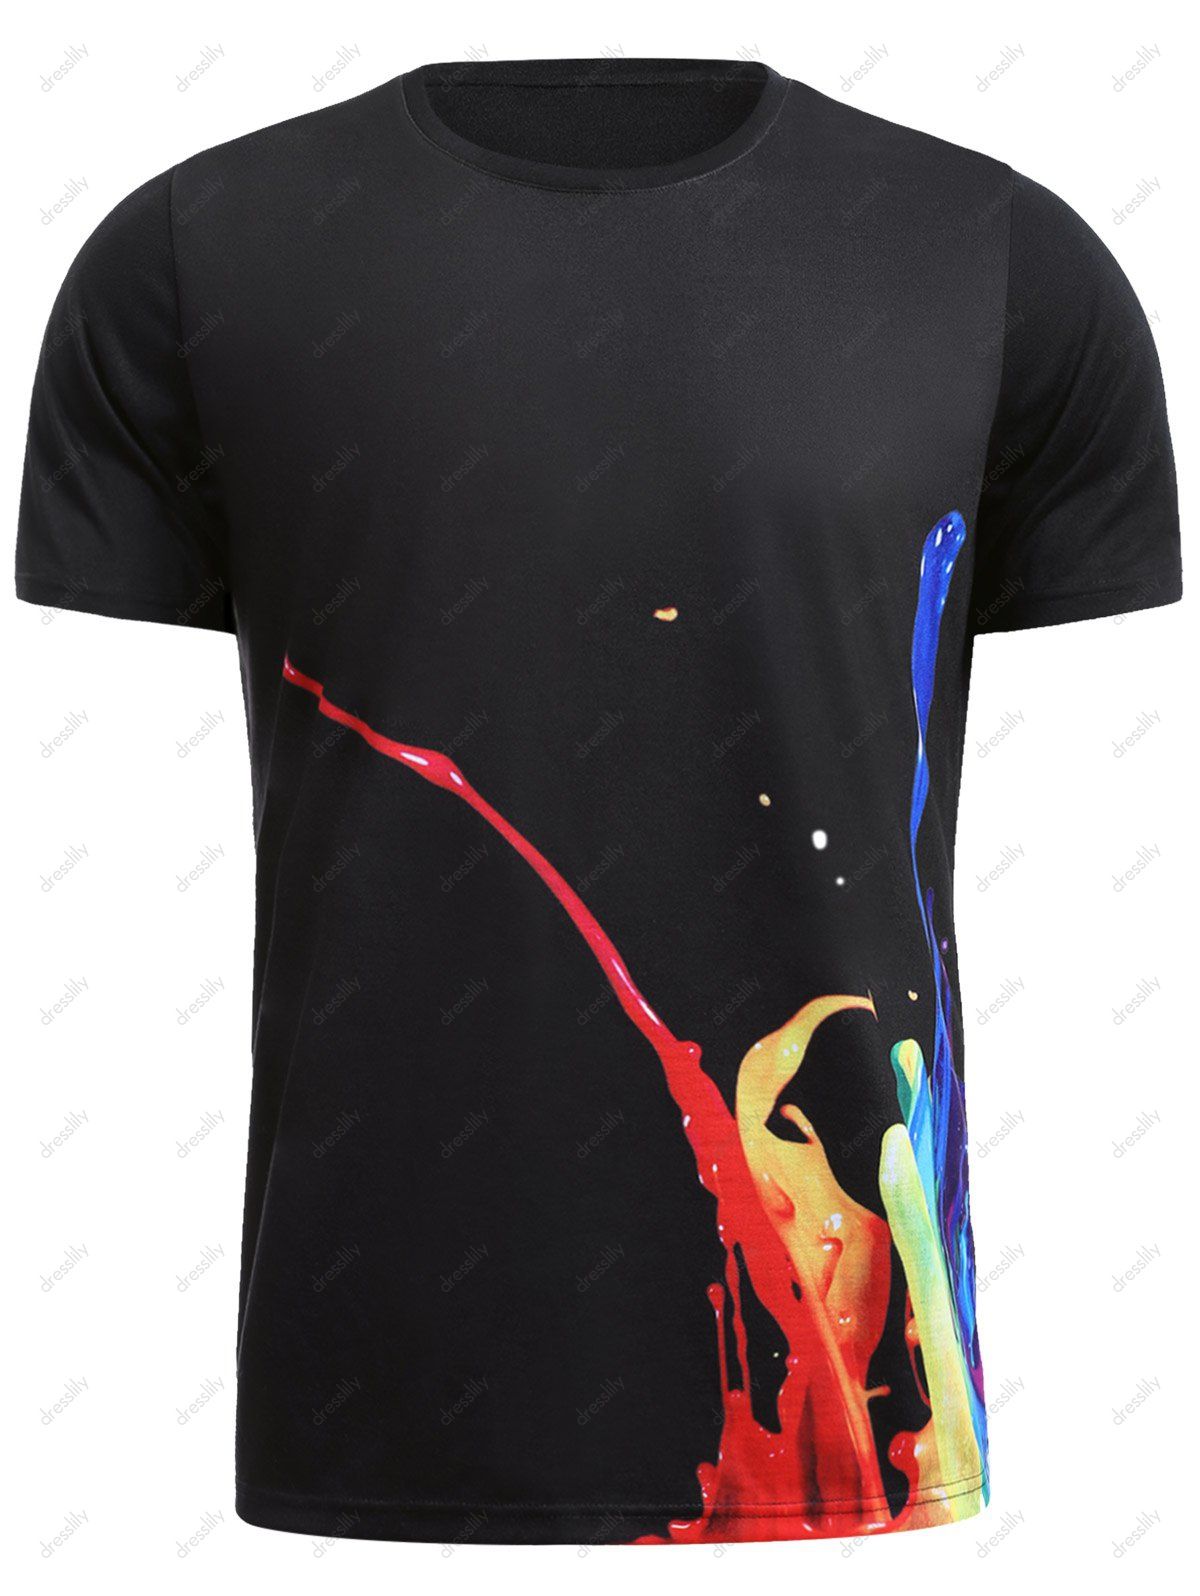 2018 Colorful Pigment Splatter Paint Printed T-Shirt BLACK XL In T ...